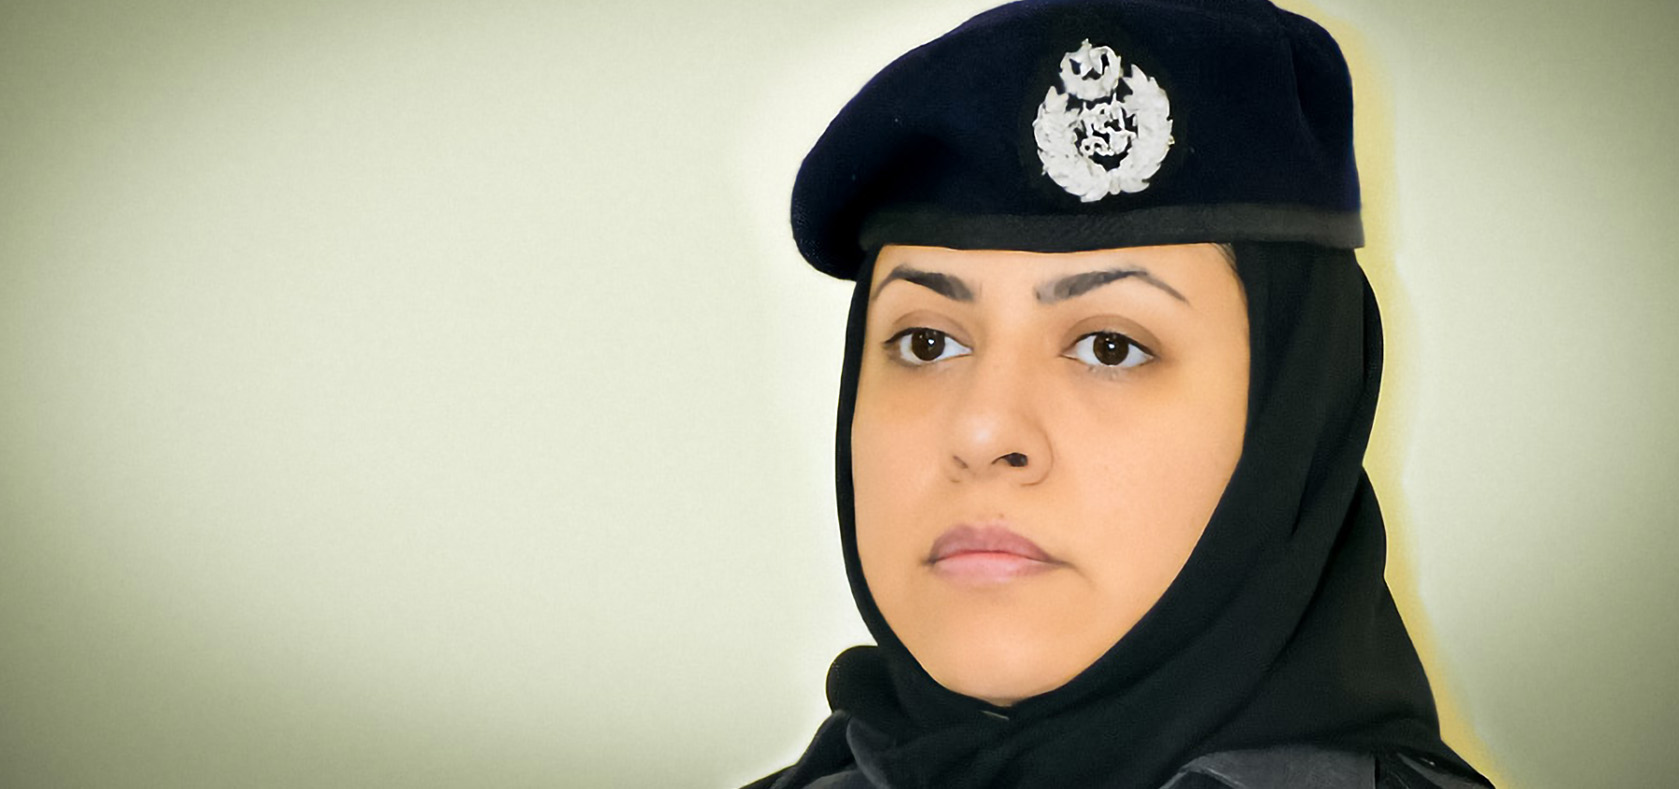 Maria Mahmood has spent the past 13 years improving the Pakistani police force to respond to the needs of women and girls. She is the role model for many women police officers. Photo was taken on 13 March 2021 in Islamabad, Pakistan. Photo: National Police Academy/Muhammad Shafee